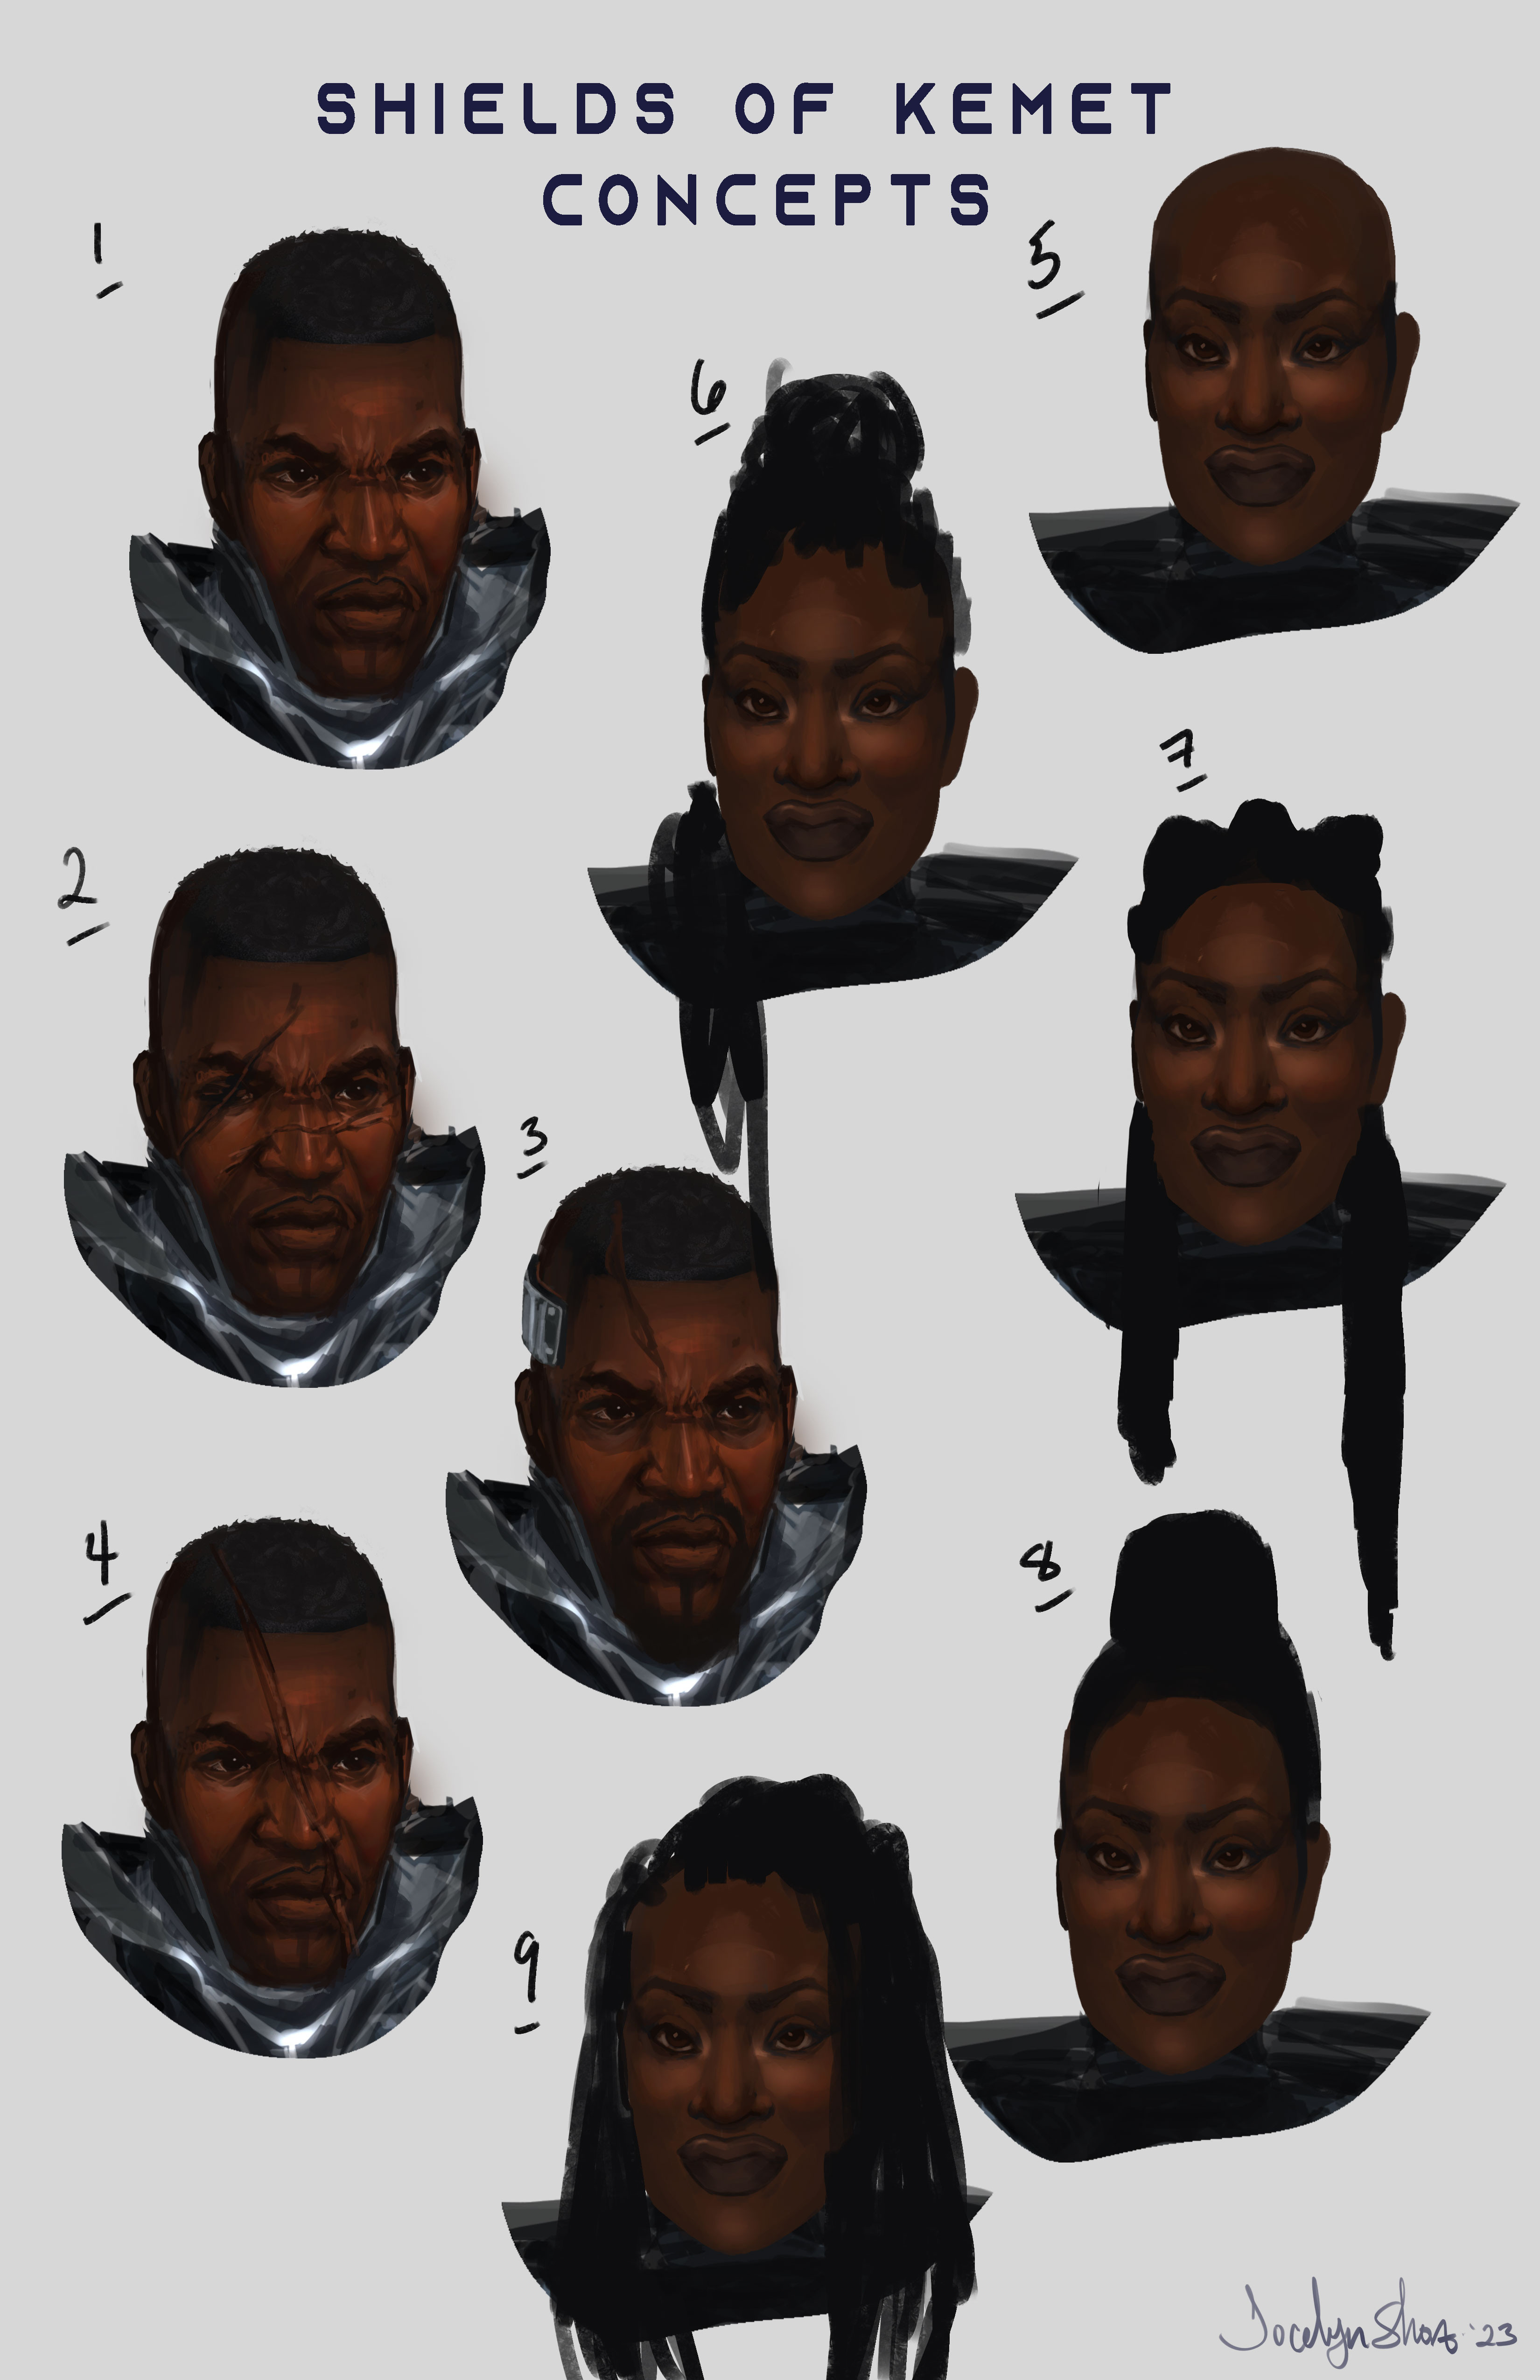 Hairstyle and facial scarring variations.